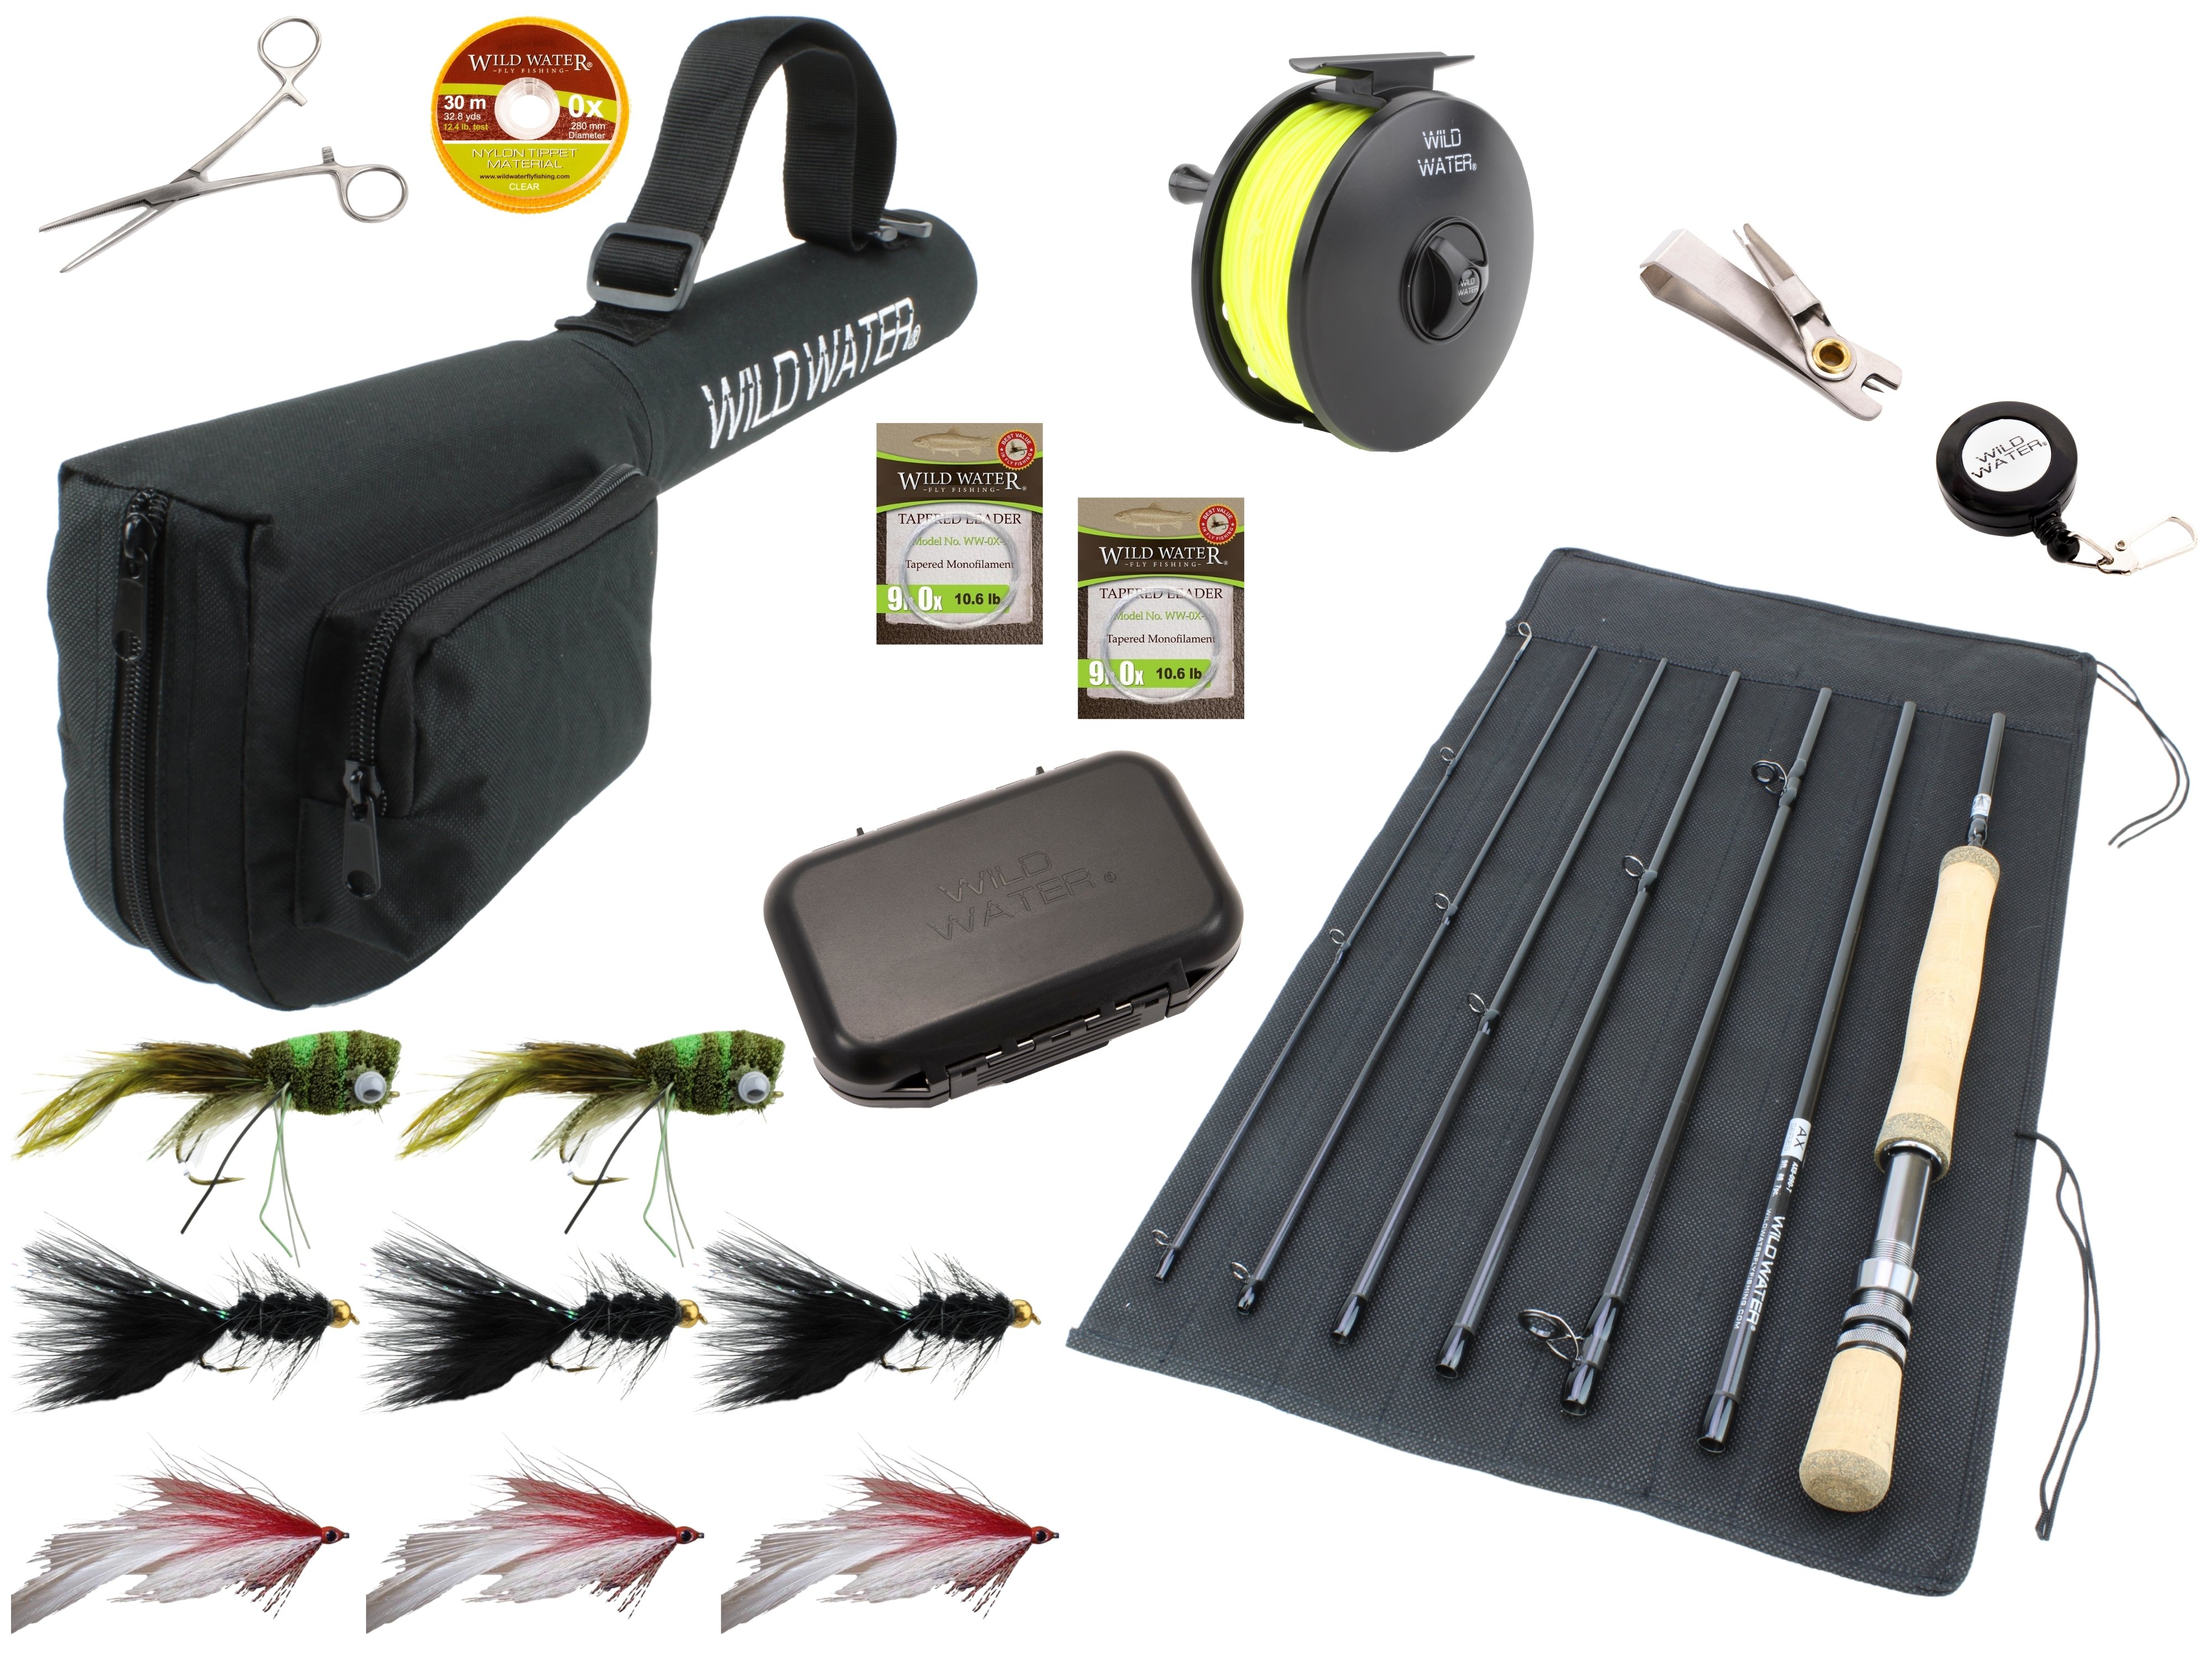 Wild Water Fly Fishing, 9 Foot, 8 Weight, 7 Piece Pack Rod and Reel, Deluxe Combo Kit, Freshwater Flies - image 1 of 6